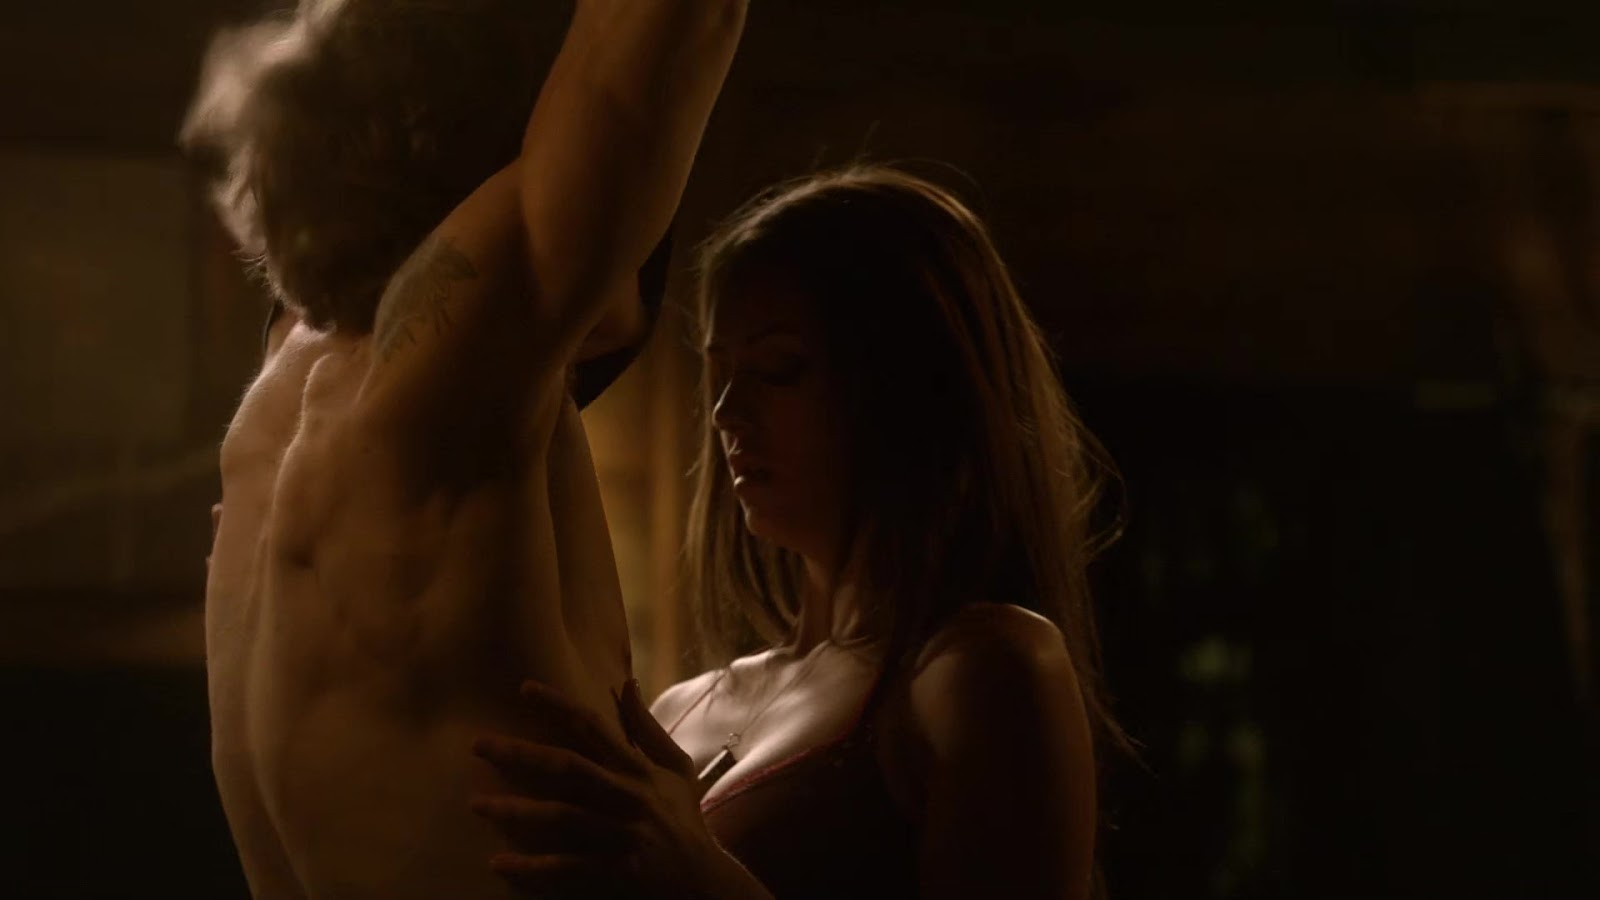 Paul Wesley shirtless in The Vampire Diaries 1-10 "The Turning Point&q...